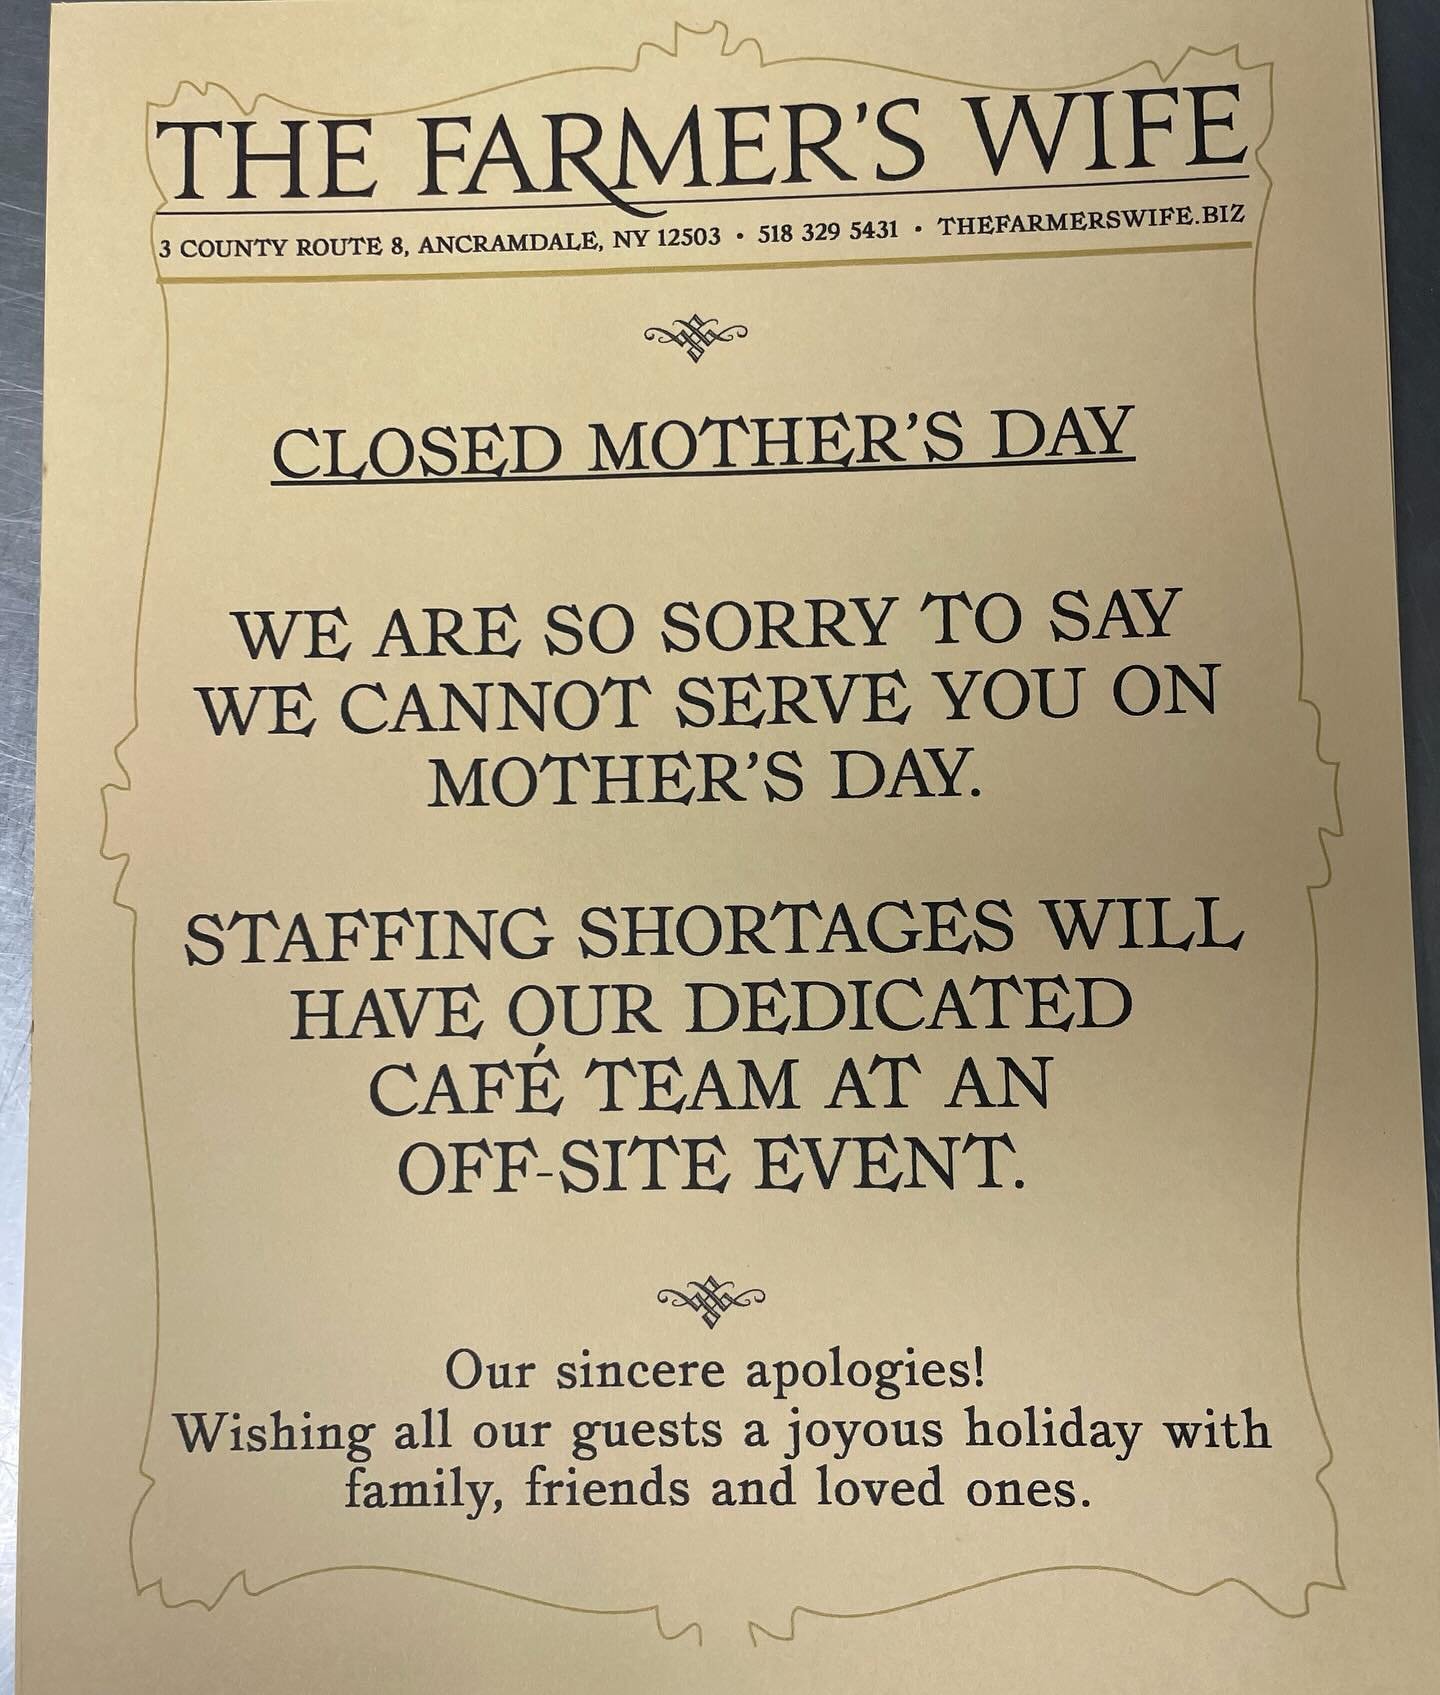 ***UPDATE***
Our cafe and storefront will be closed TOMORROW, Mother&rsquo;s Day.
Unfortunately we have to borrow our cafe staff to fulfill last minute shortages at an off-site event! We are so sorry to miss you on this special day.

We are OPEN TODA